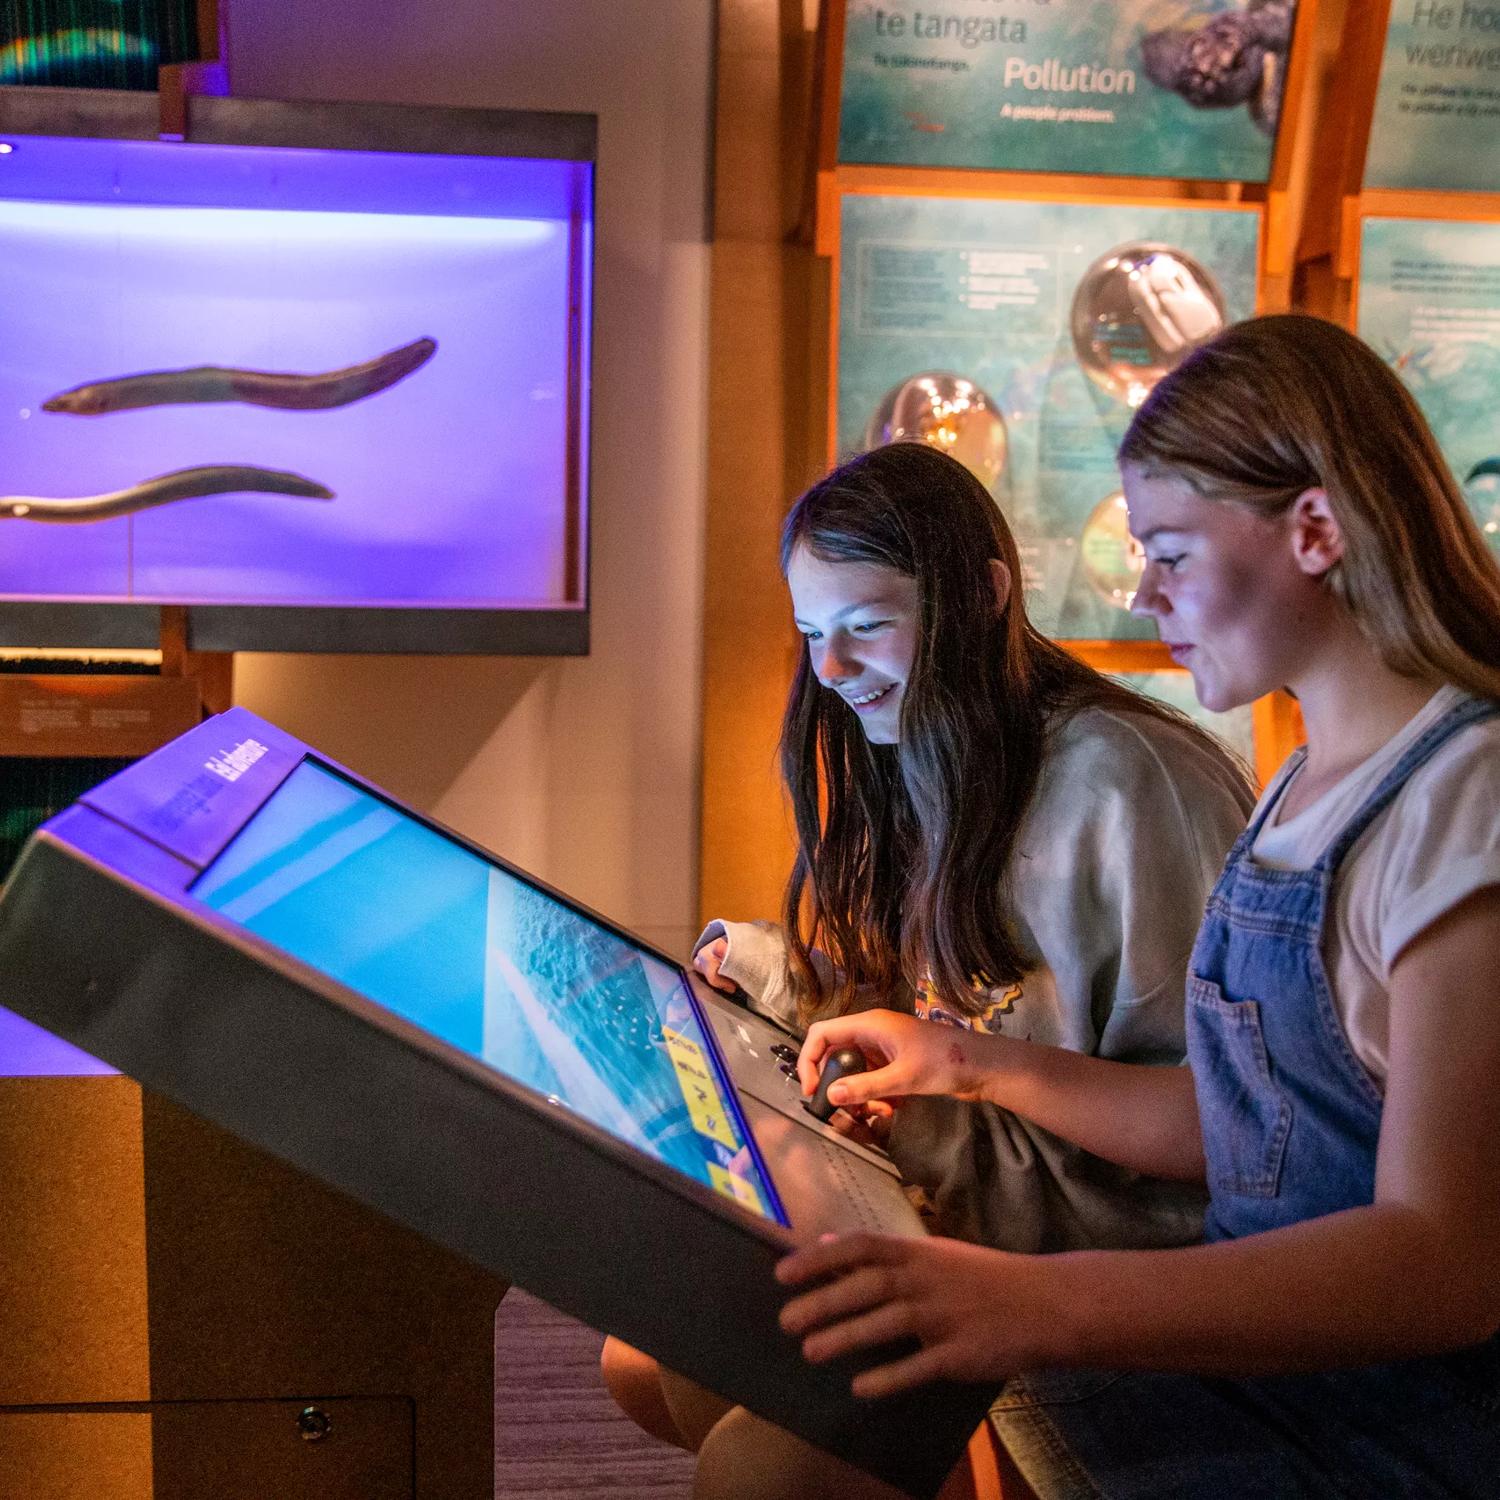 Two people using an interactive screen at the Museum of New Zealand Te Papa Tongarewa.